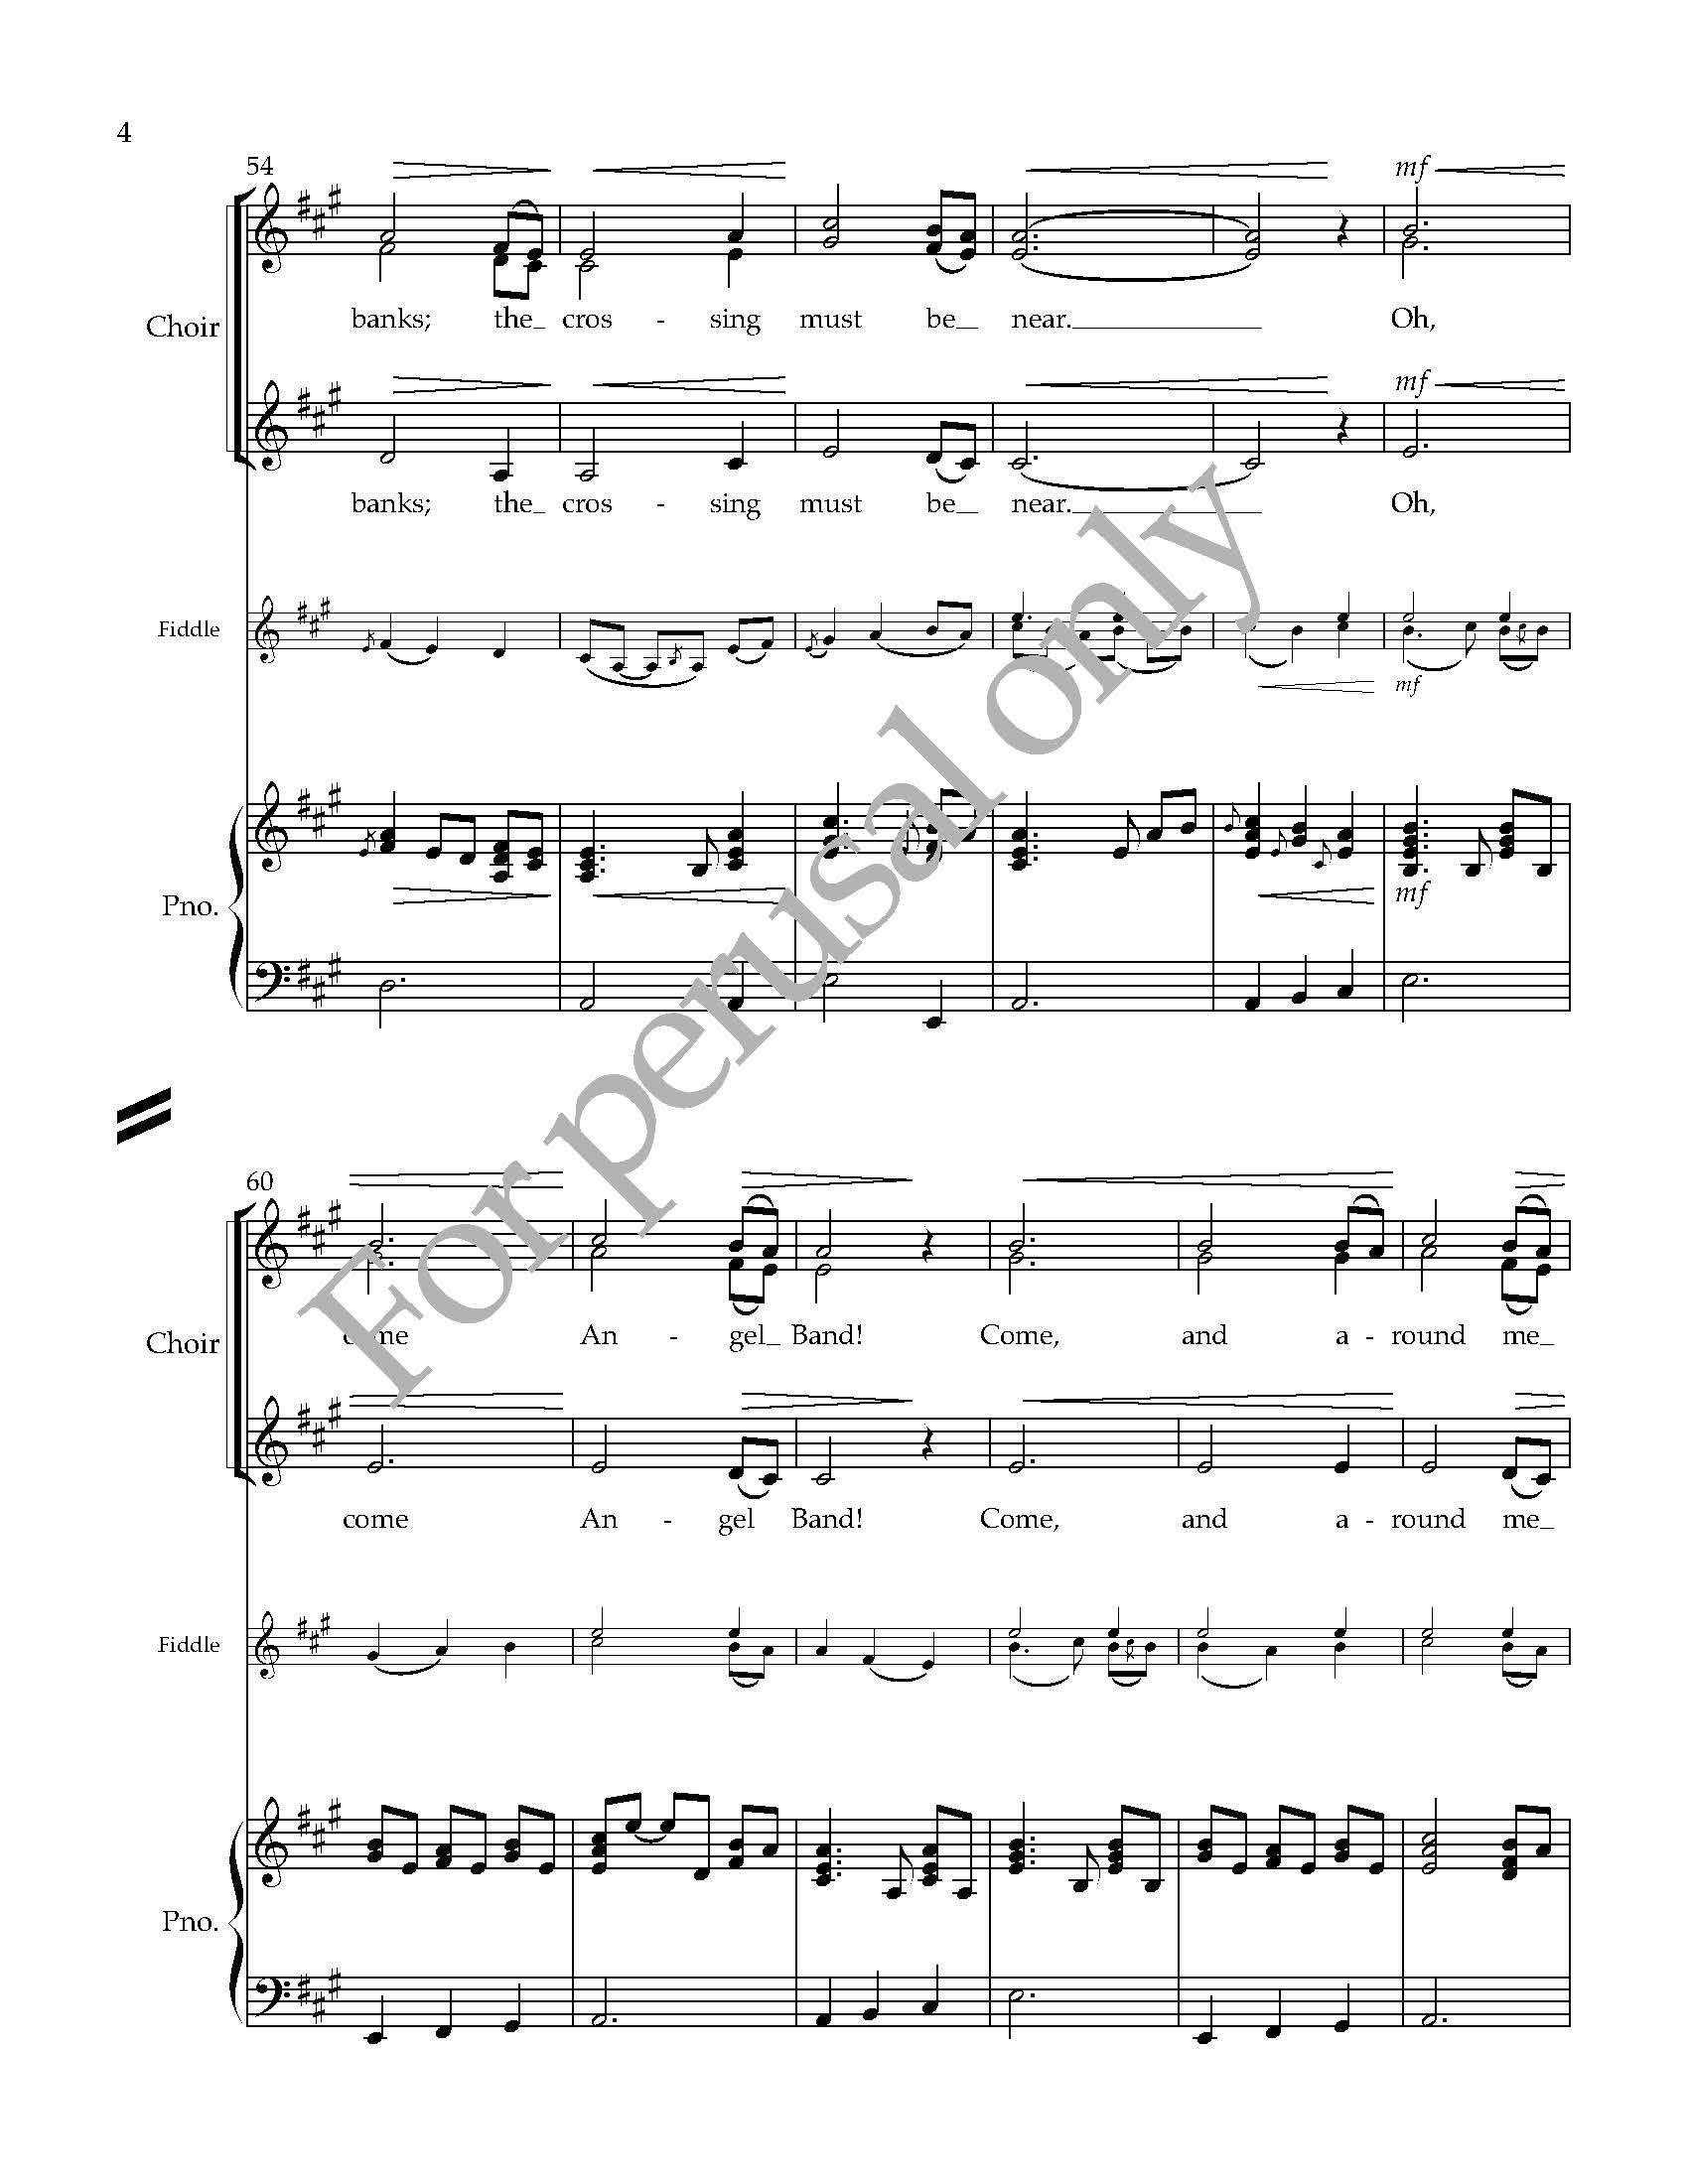 VOCAL SCORE  preview- Angel Band for three-part choir, piano, fiddle, guitar, string bass - arr. Ryan James Brandau_Page_06.jpg